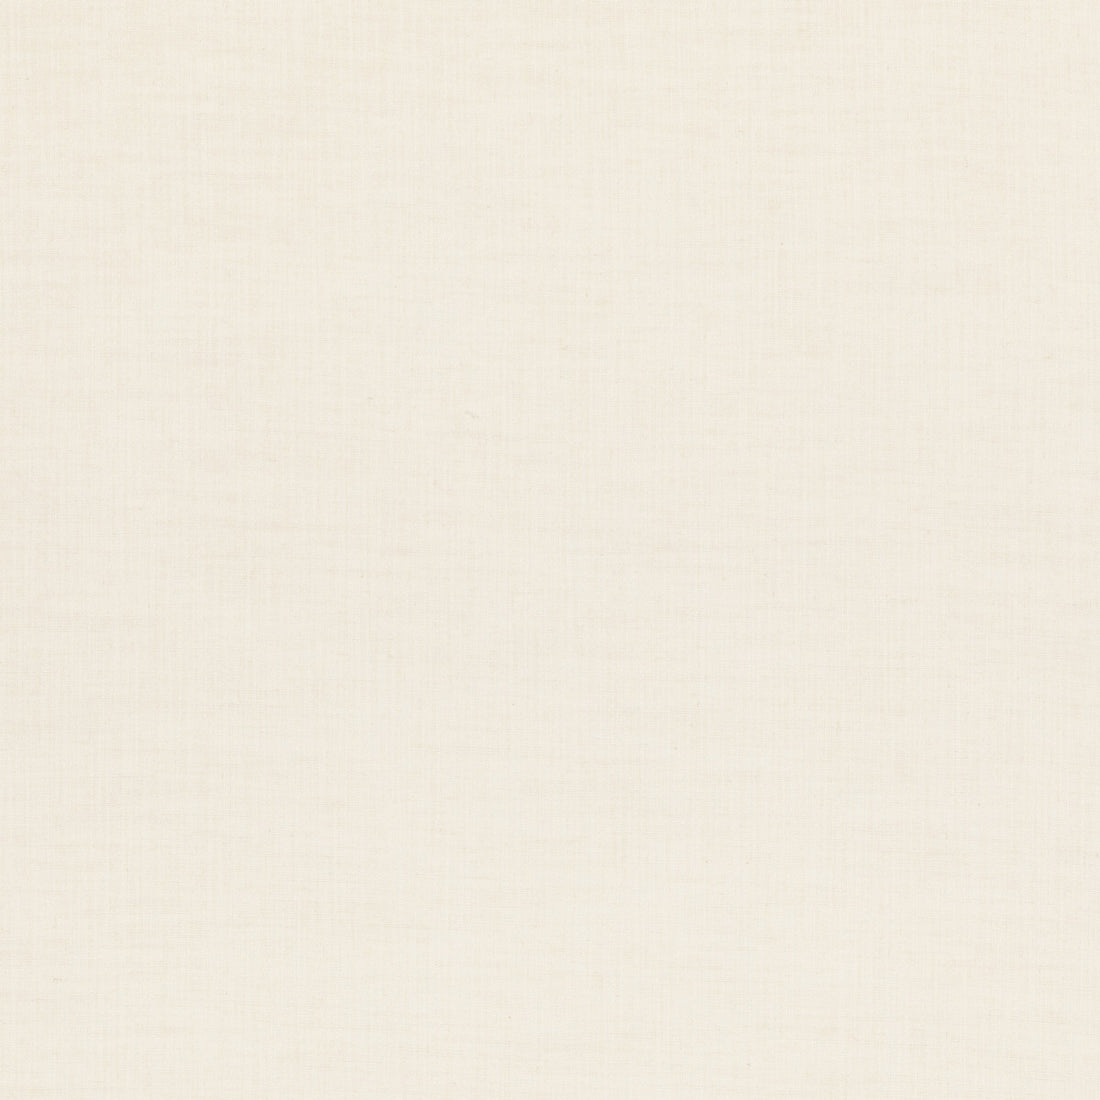 Omega fabric in ivory color - pattern ED85380.104.0 - by Threads in the Quintessential Textures collection